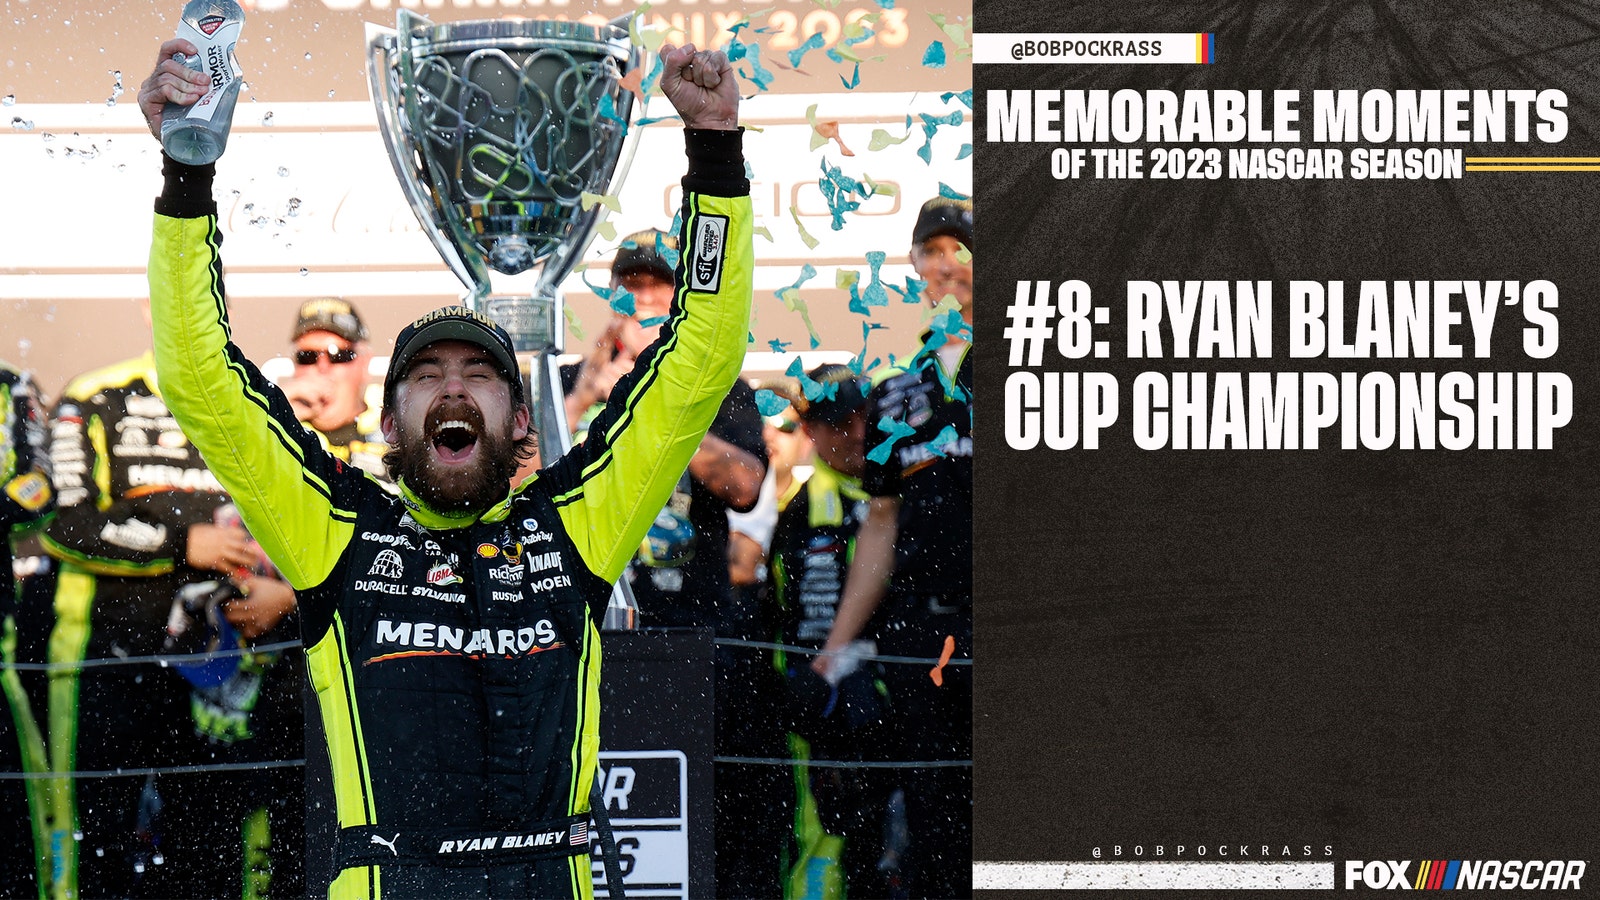 Ryan Blaney's Cup Championship | Most Memorable Moments of 2023 NASCAR Season